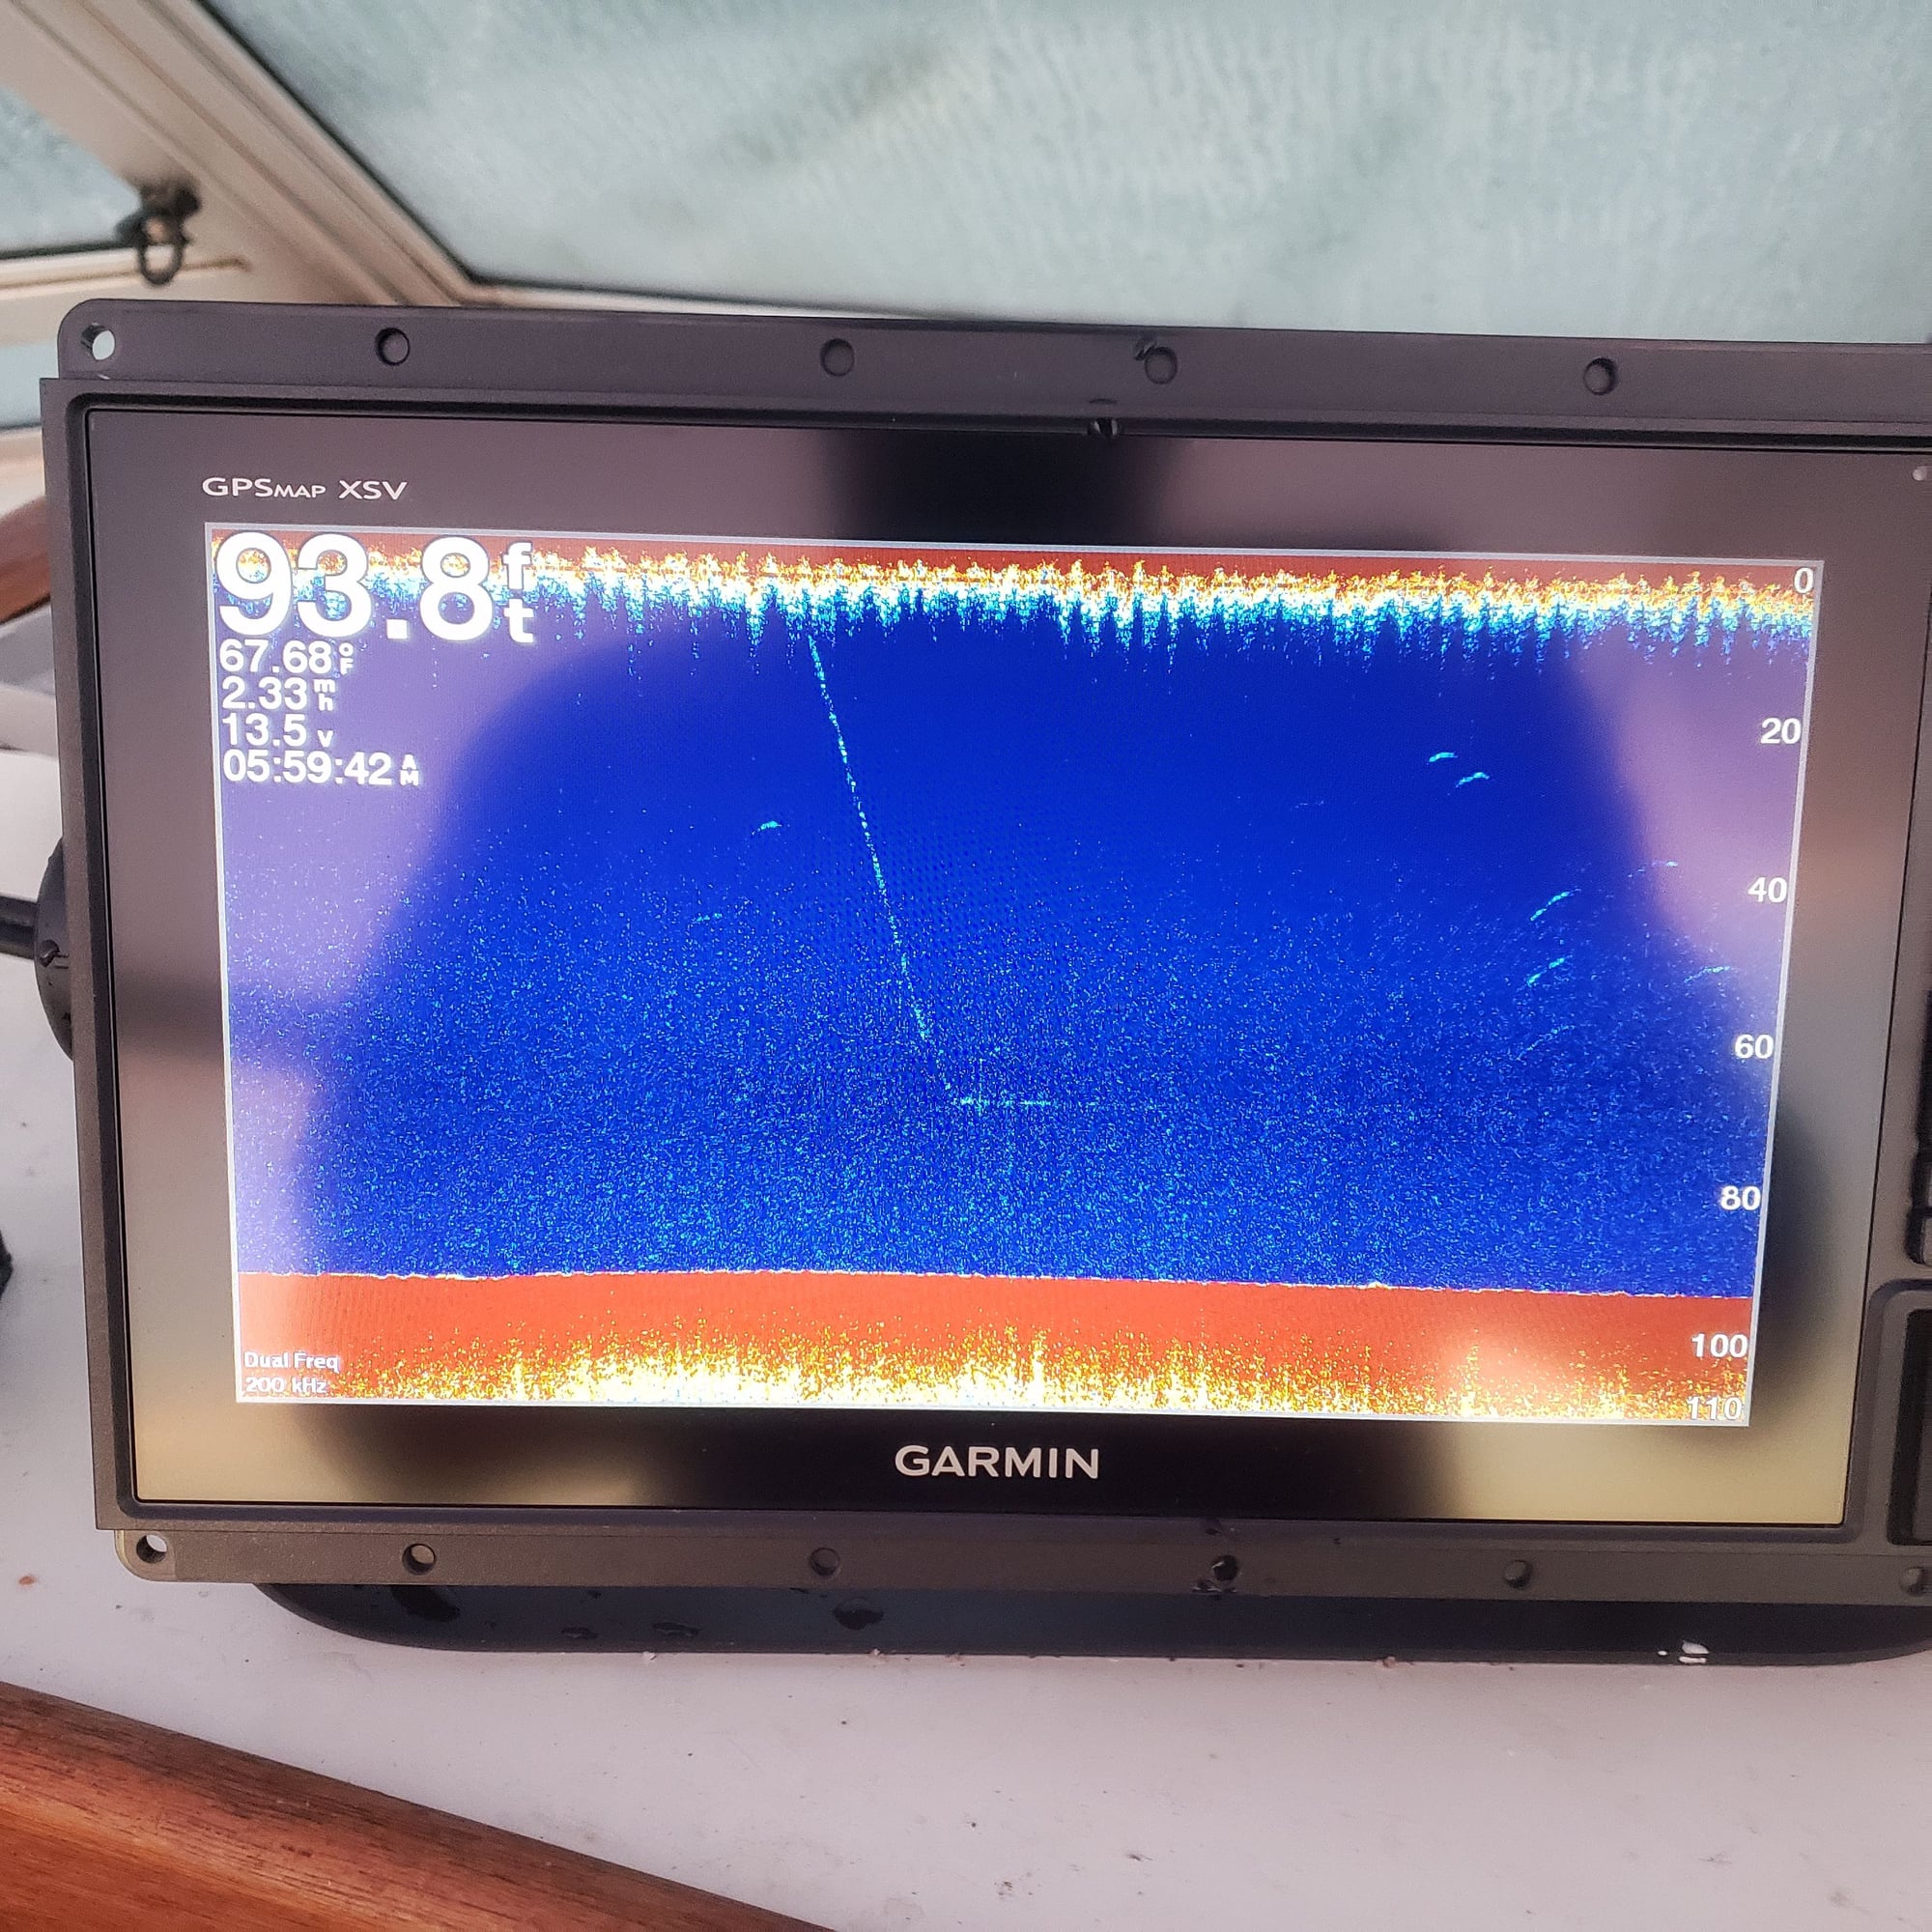 New Garmin 1042 and tm165hw help - The Hull Truth - Boating and